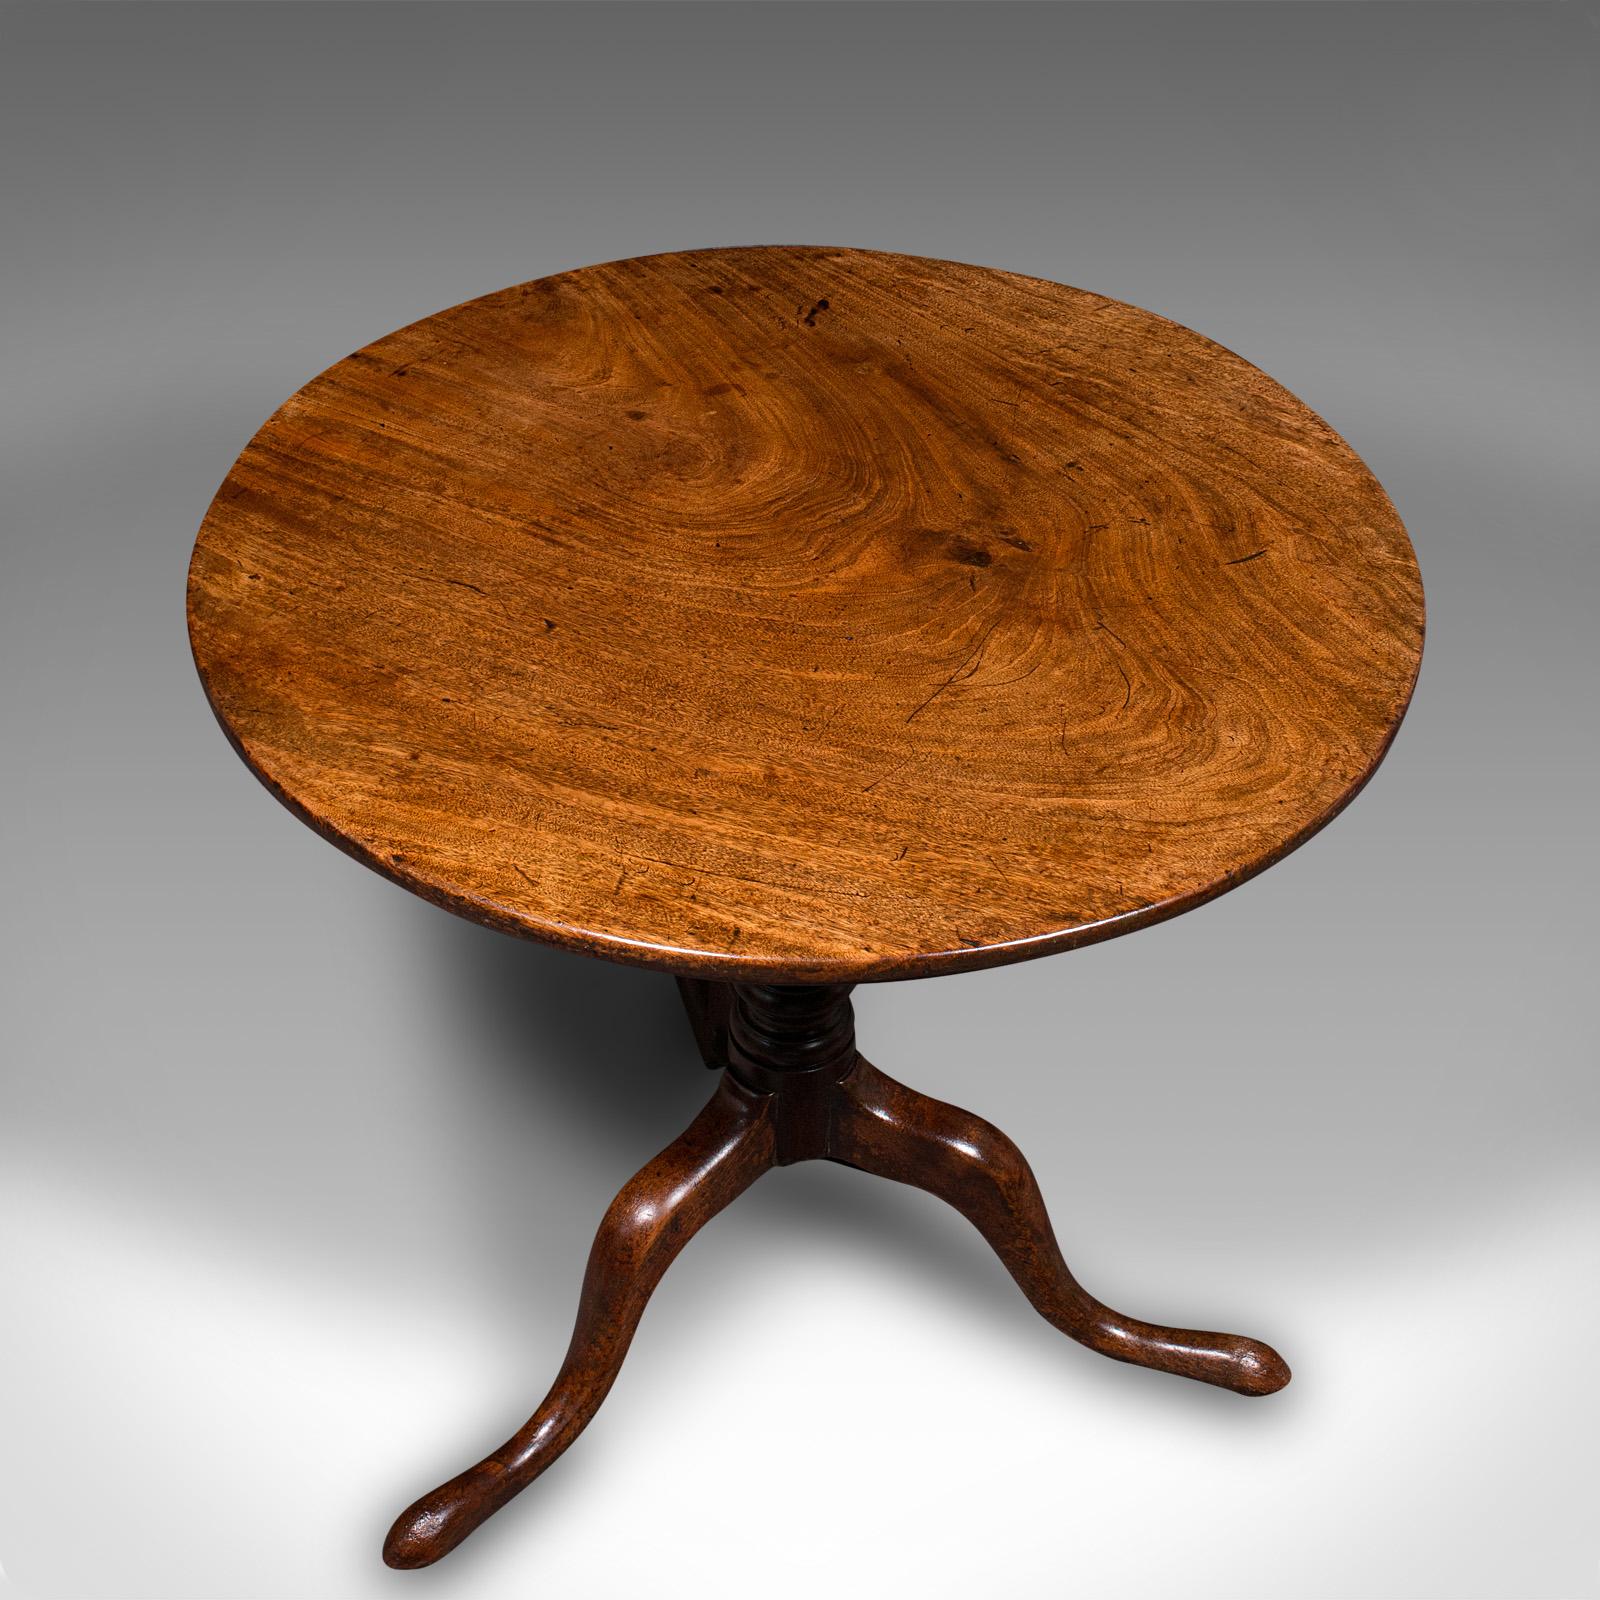 Antique Occasional Table, English, Tilt Top, Lamp, Afternoon Tea, Georgian, 1800 For Sale 1